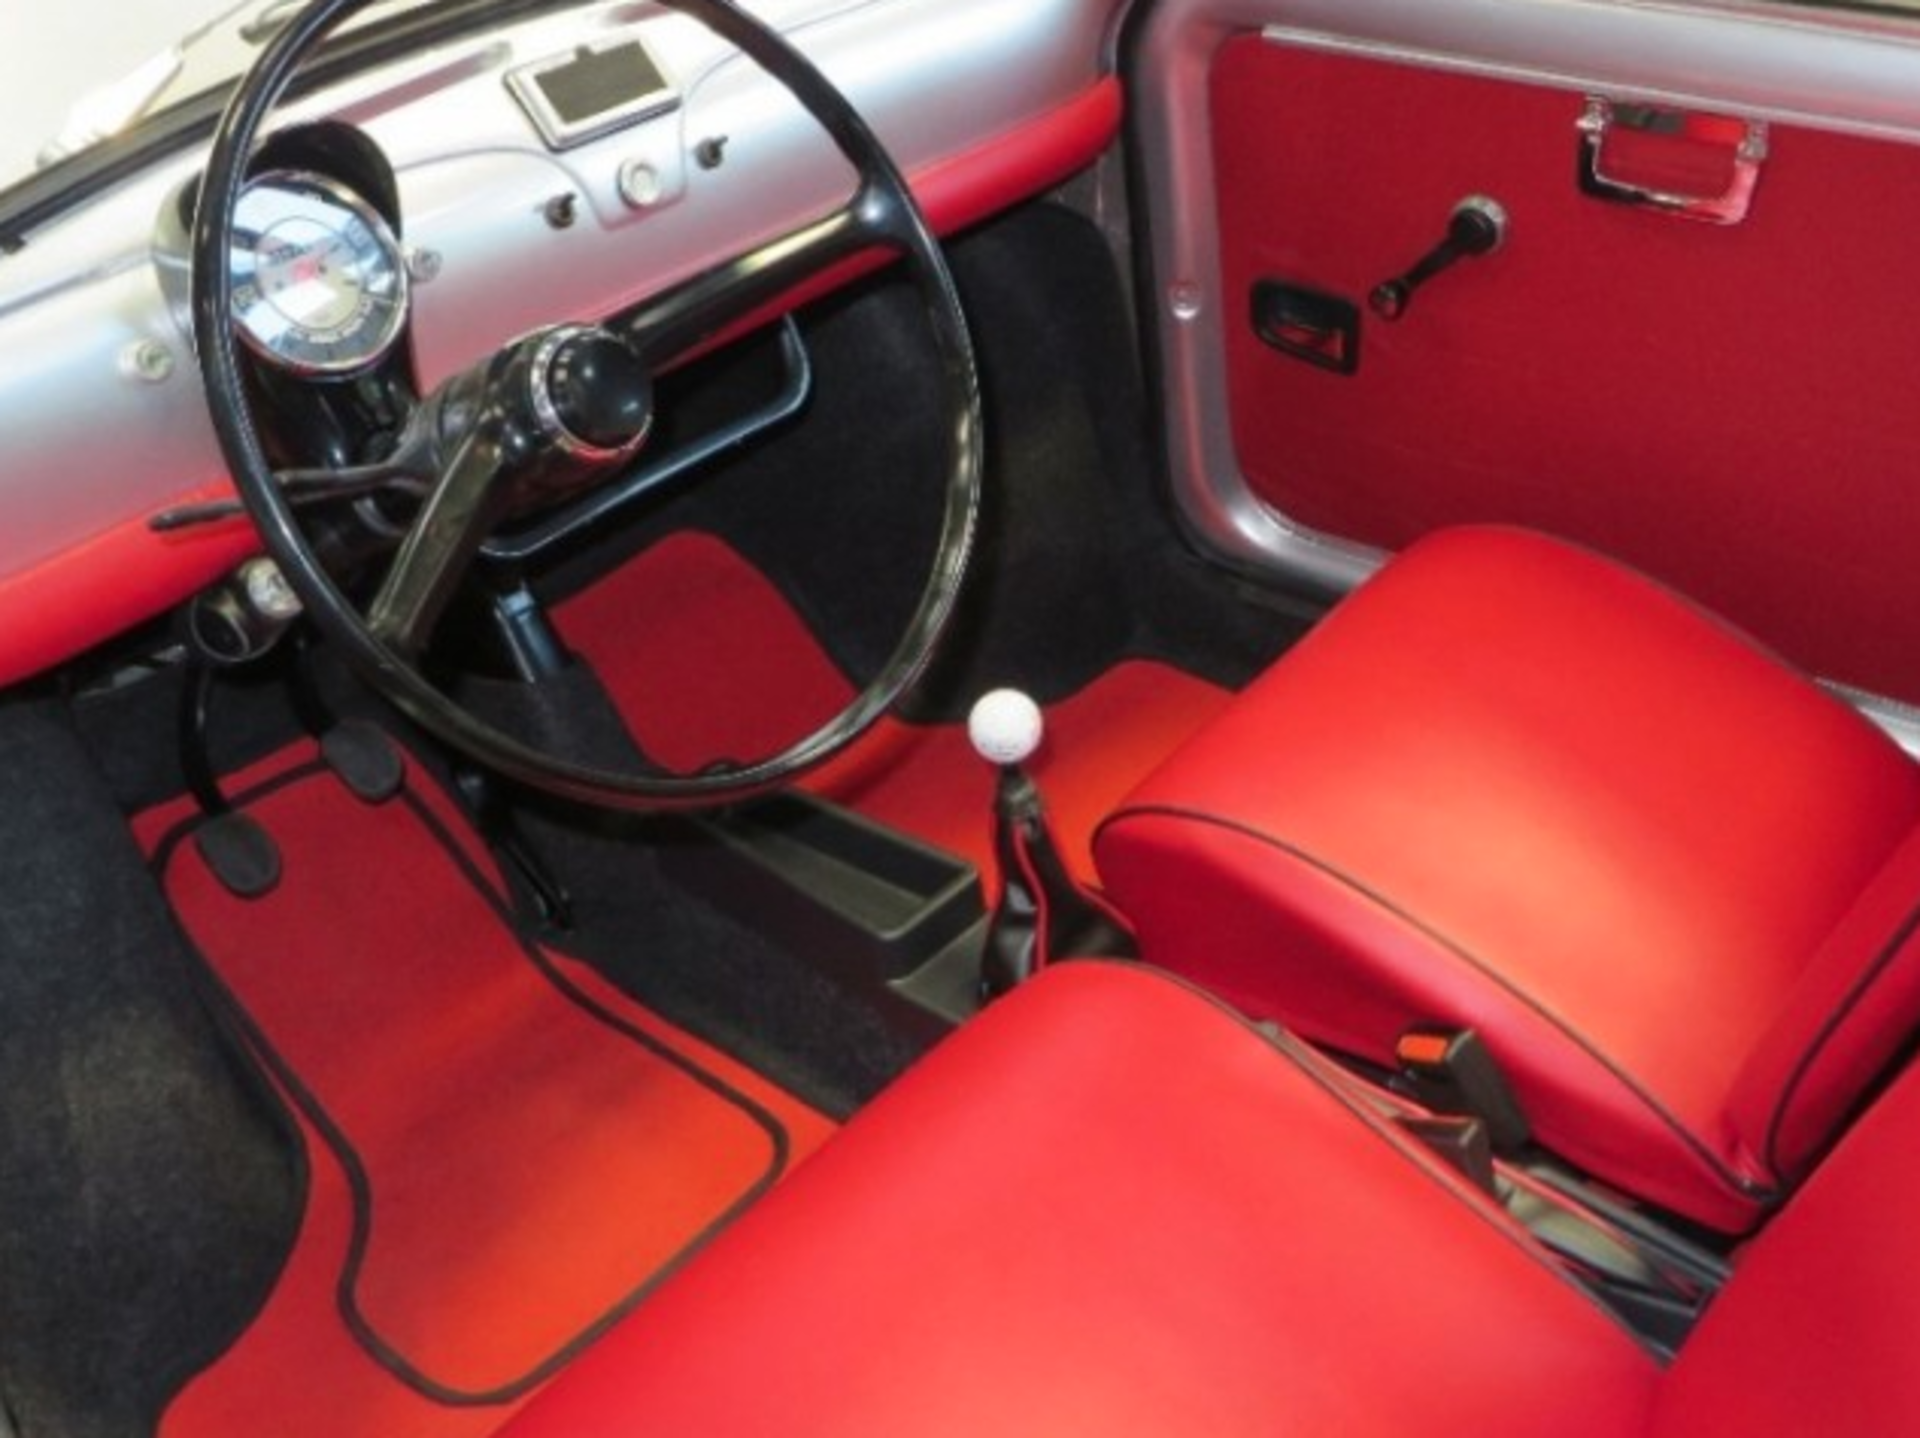 Fiat 500 R-1976. Full Restoration and 8 Kilometres since - Image 9 of 23